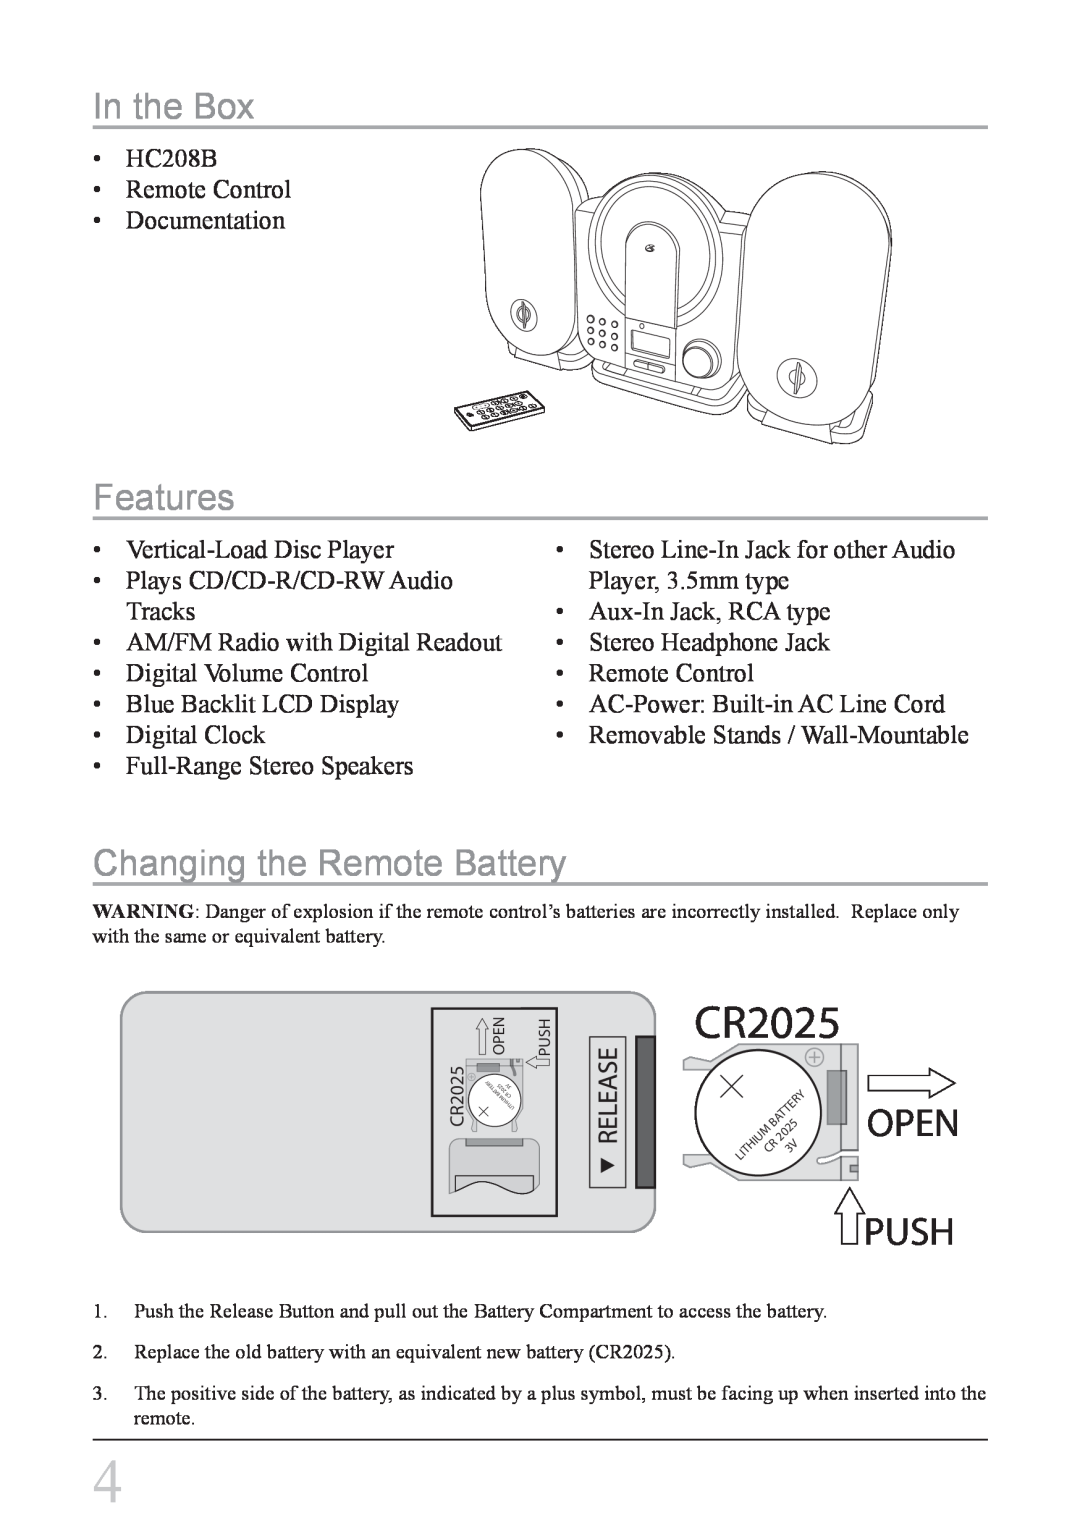 GPX HC208B instruction manual In the Box, Features, Changing the Remote Battery, CR2025, Push, Open 